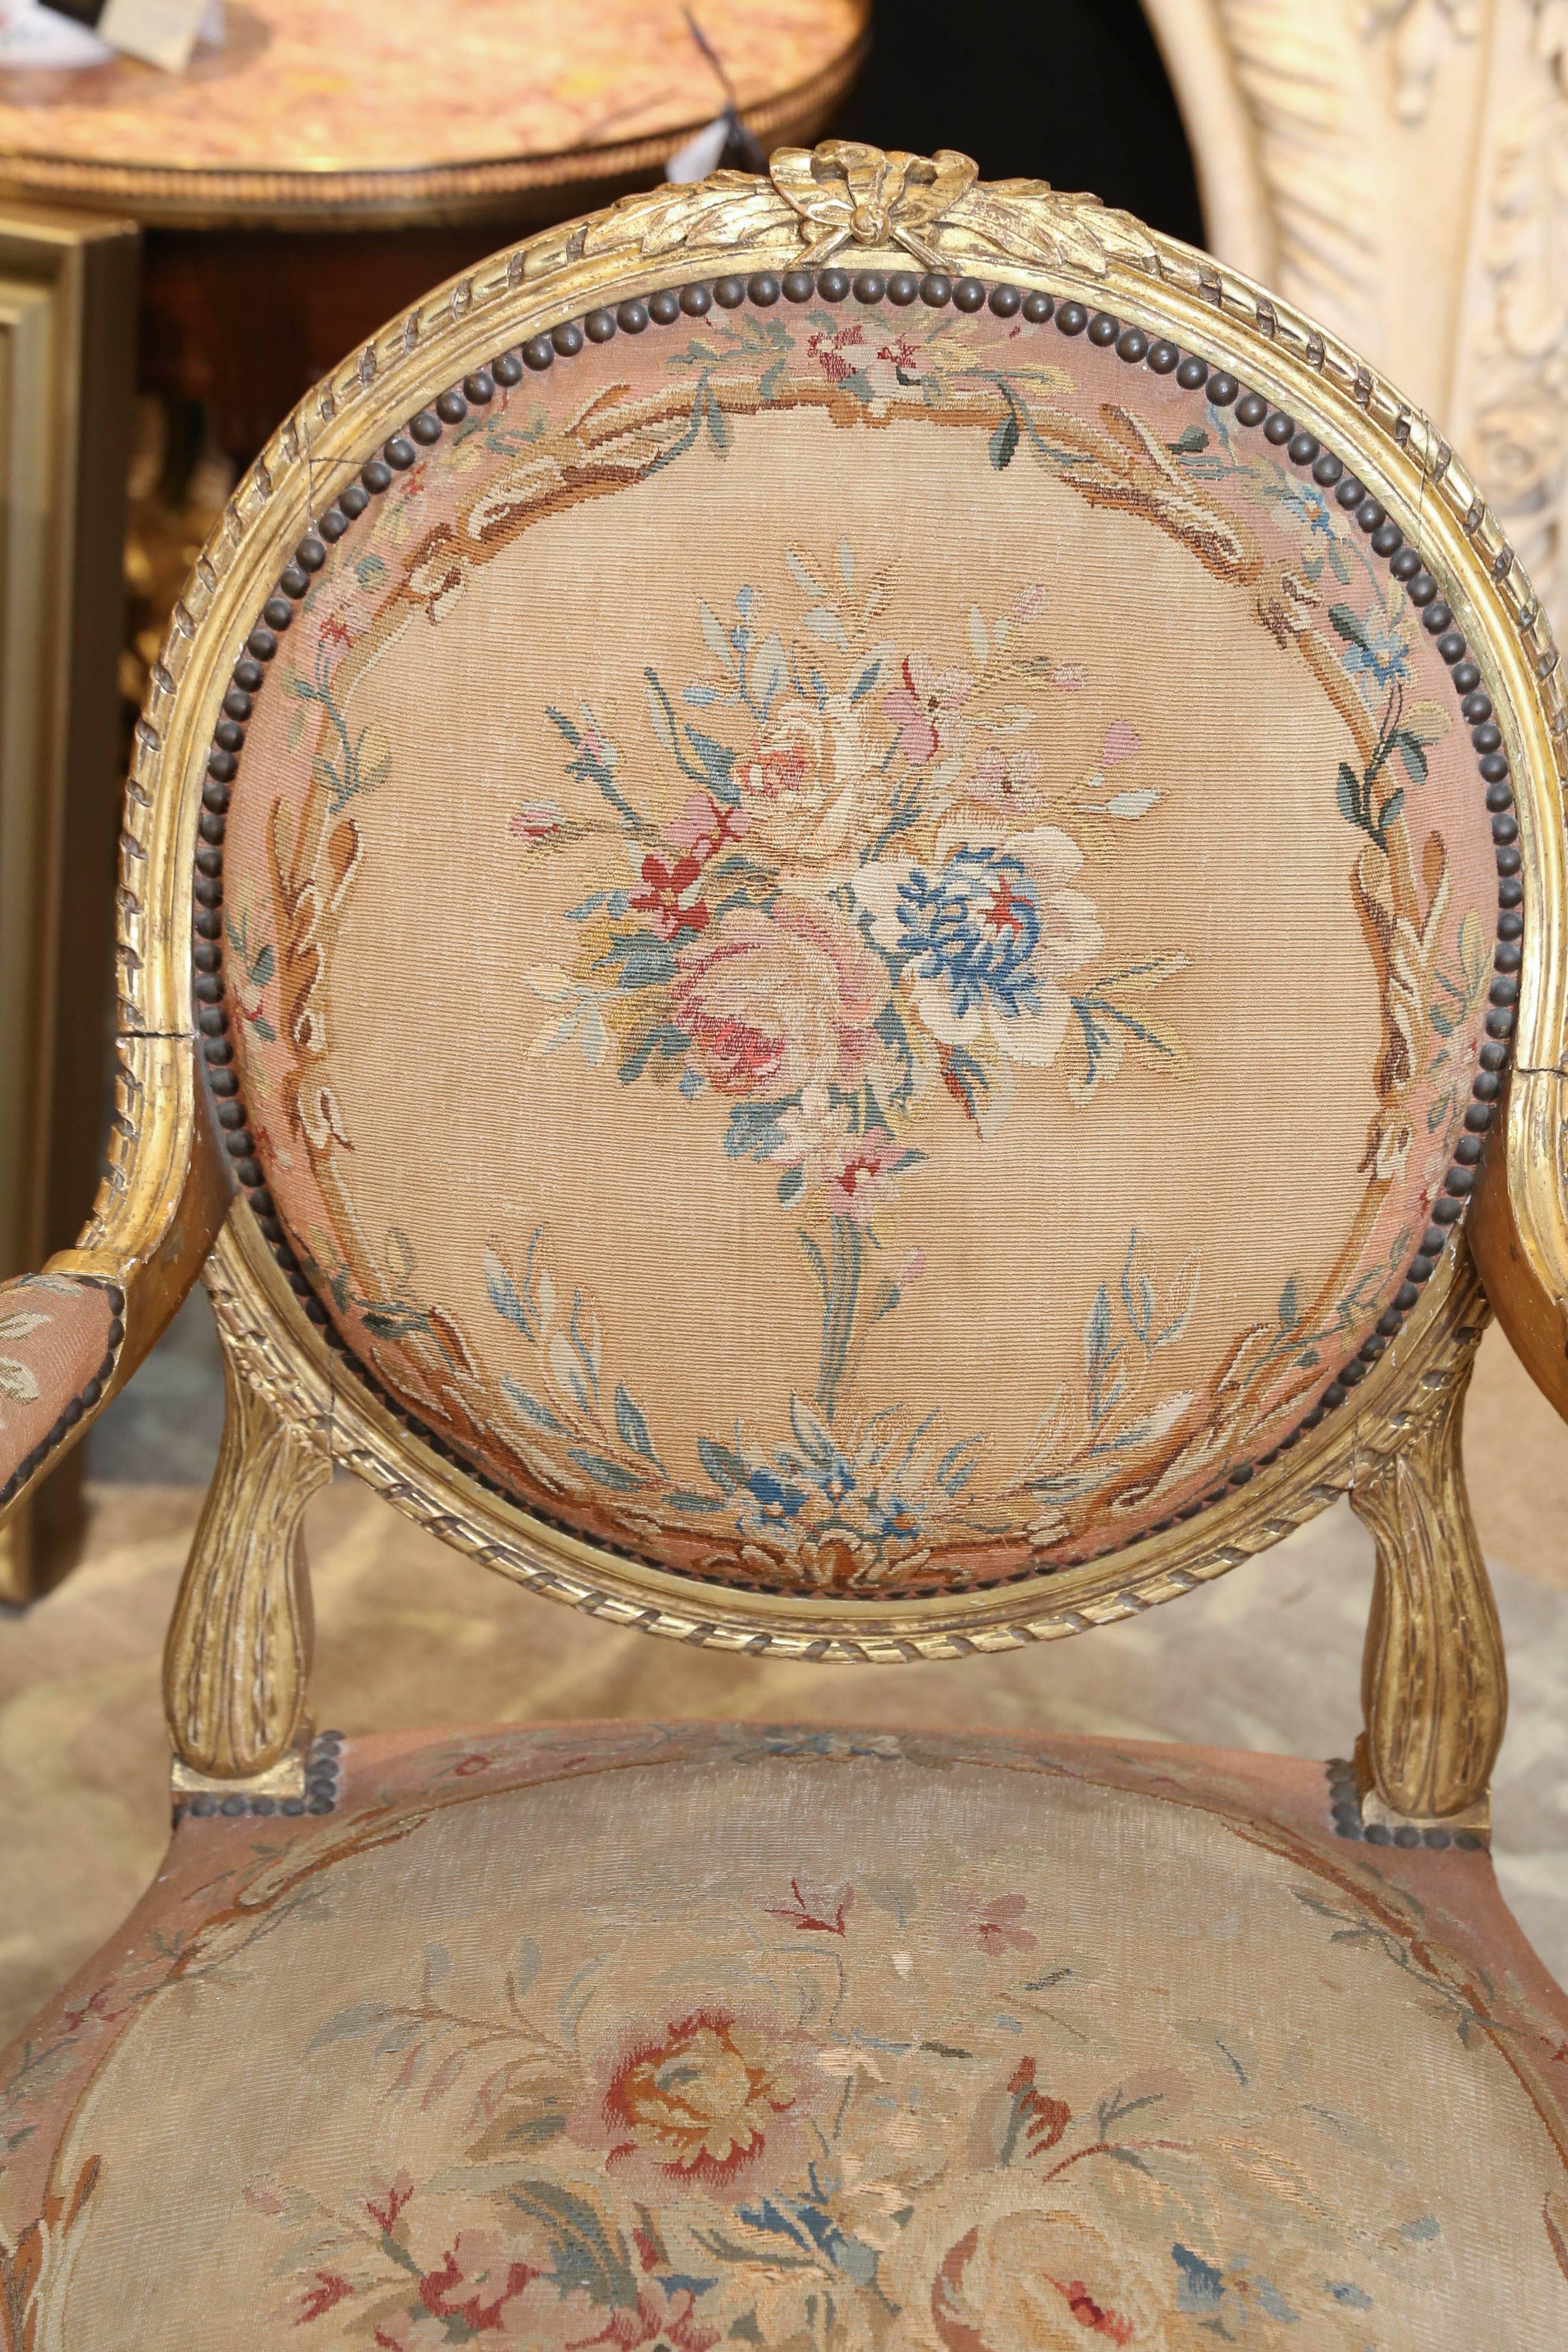 Original Aubusson upholstery and 19th century giltwood fauteuils in very good
condition with very little wear. Floral design in rose, teal and pale green
colors. A bow design at the crest of the chairs embellishes the overall.
Reeded legs and